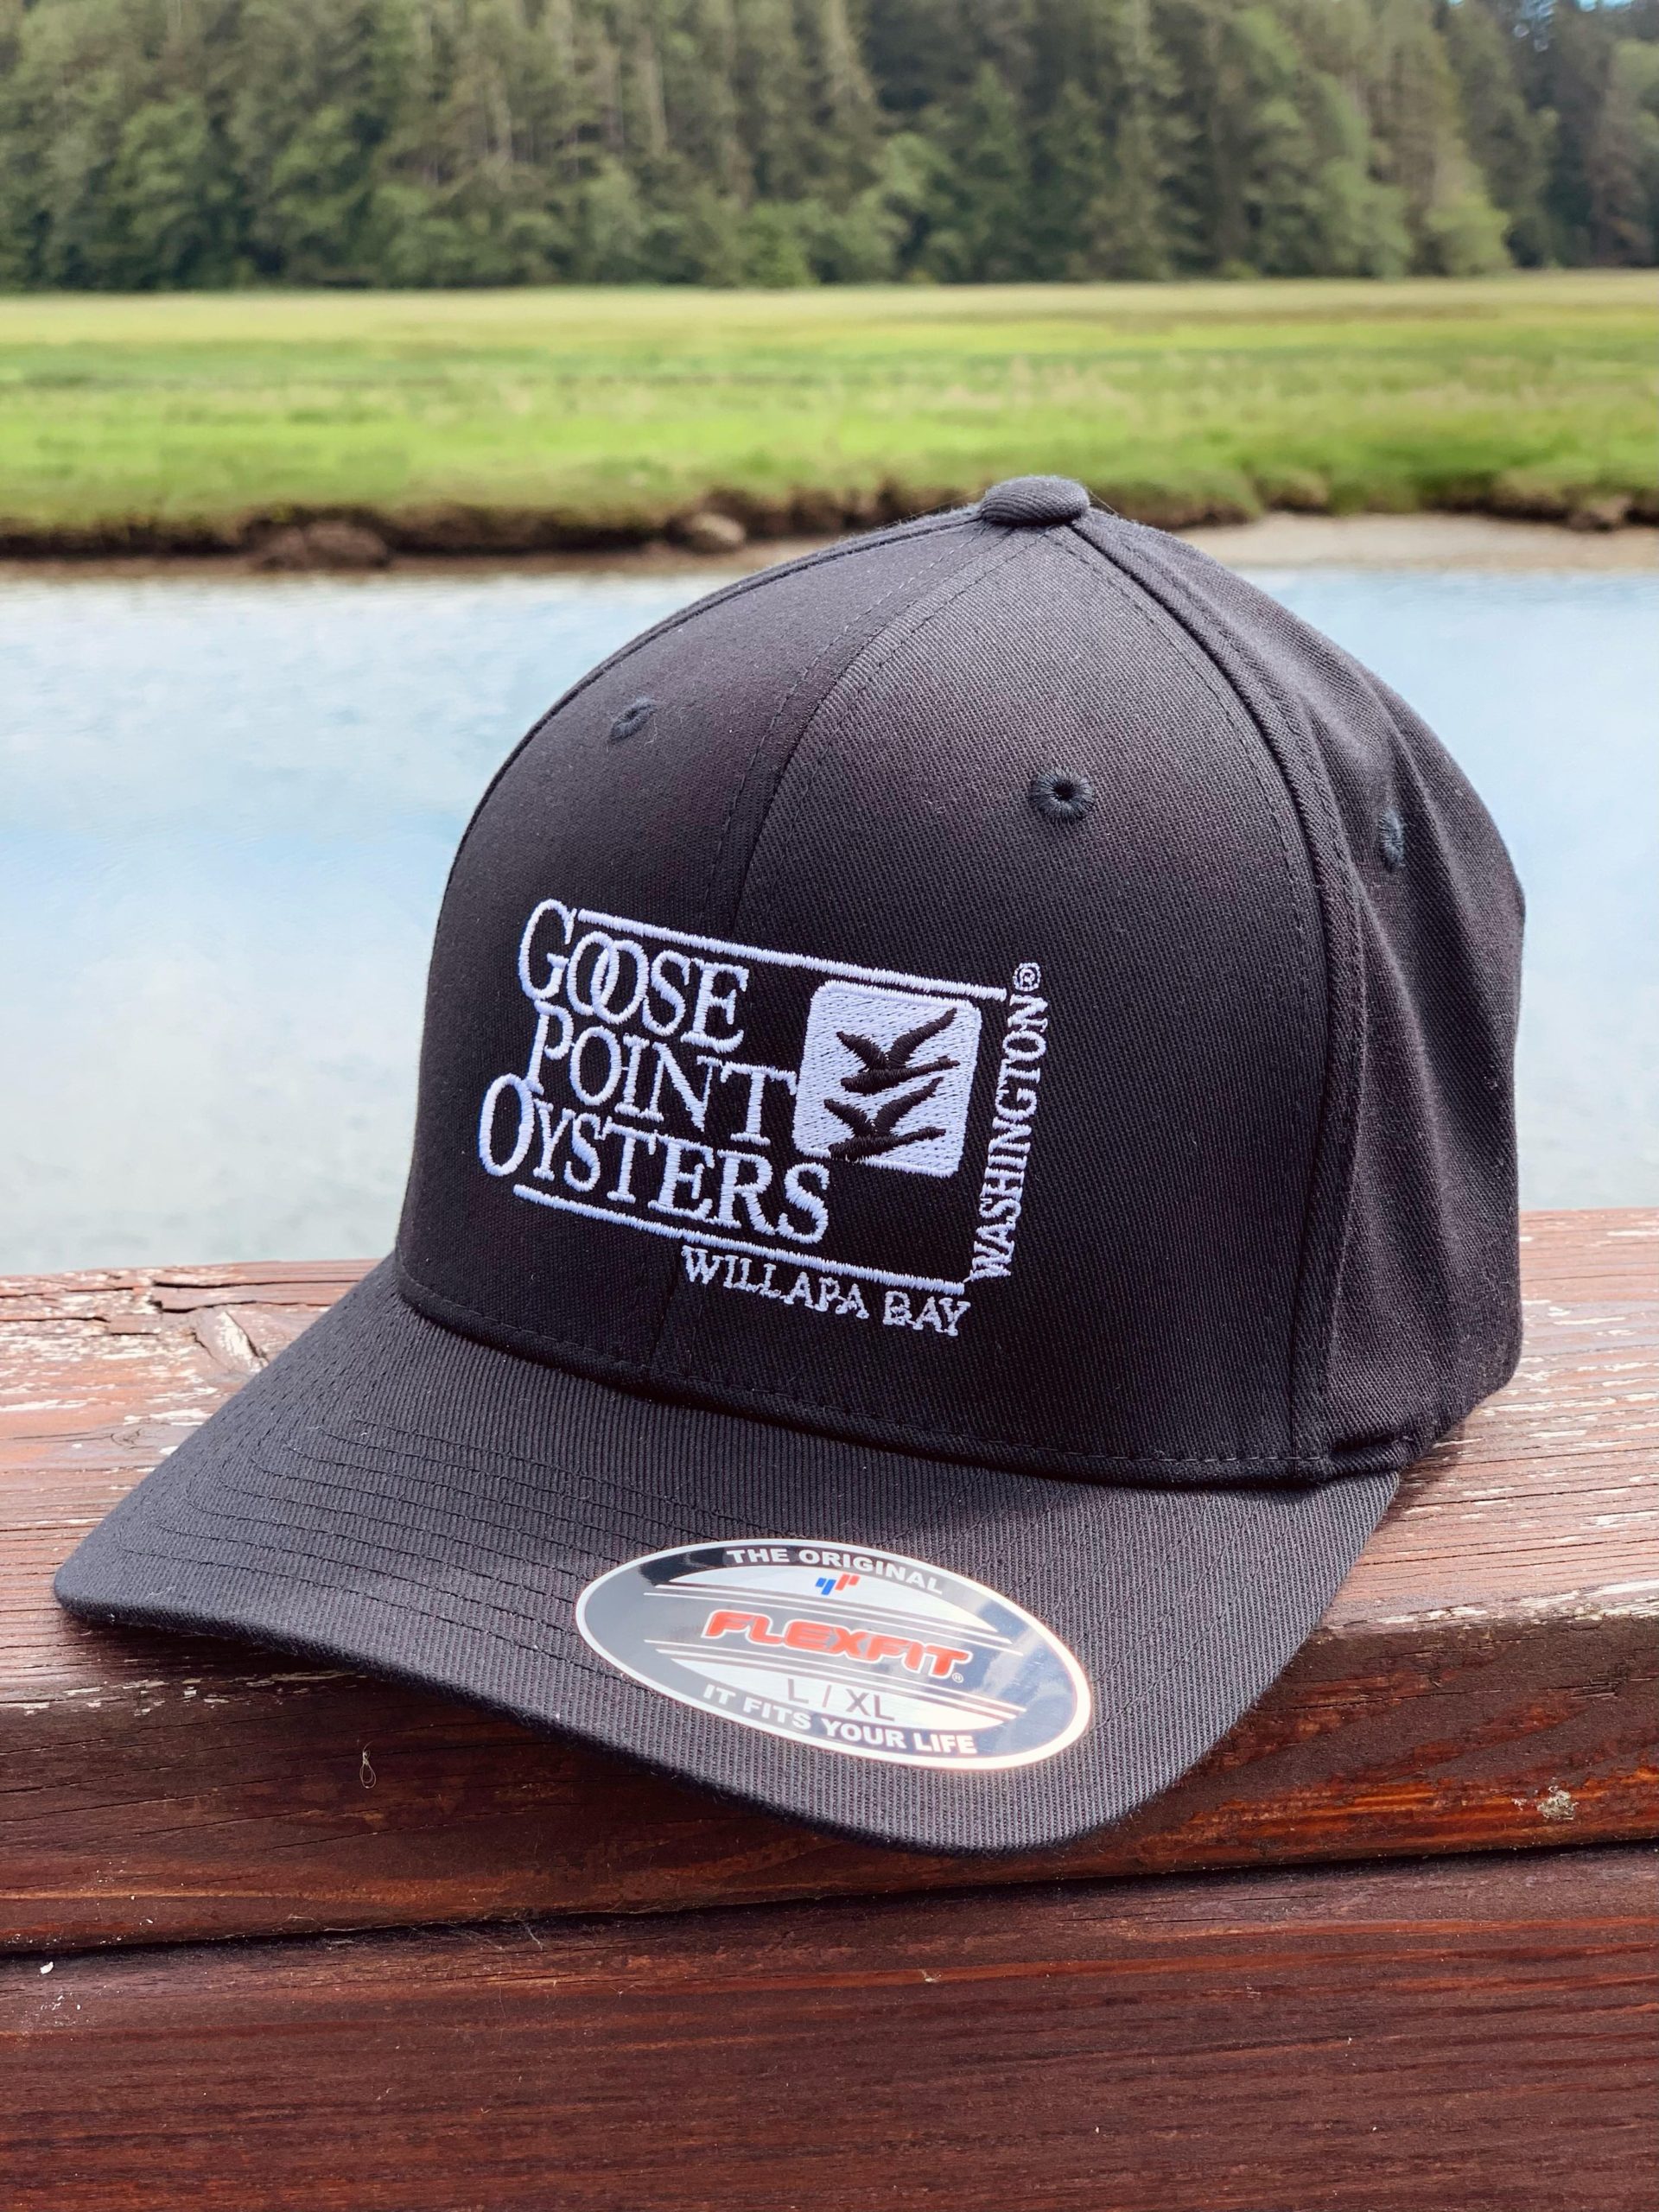 Goose Point Oysters Flex Fit Hat - Goose Point Shellfish Farm & Oystery